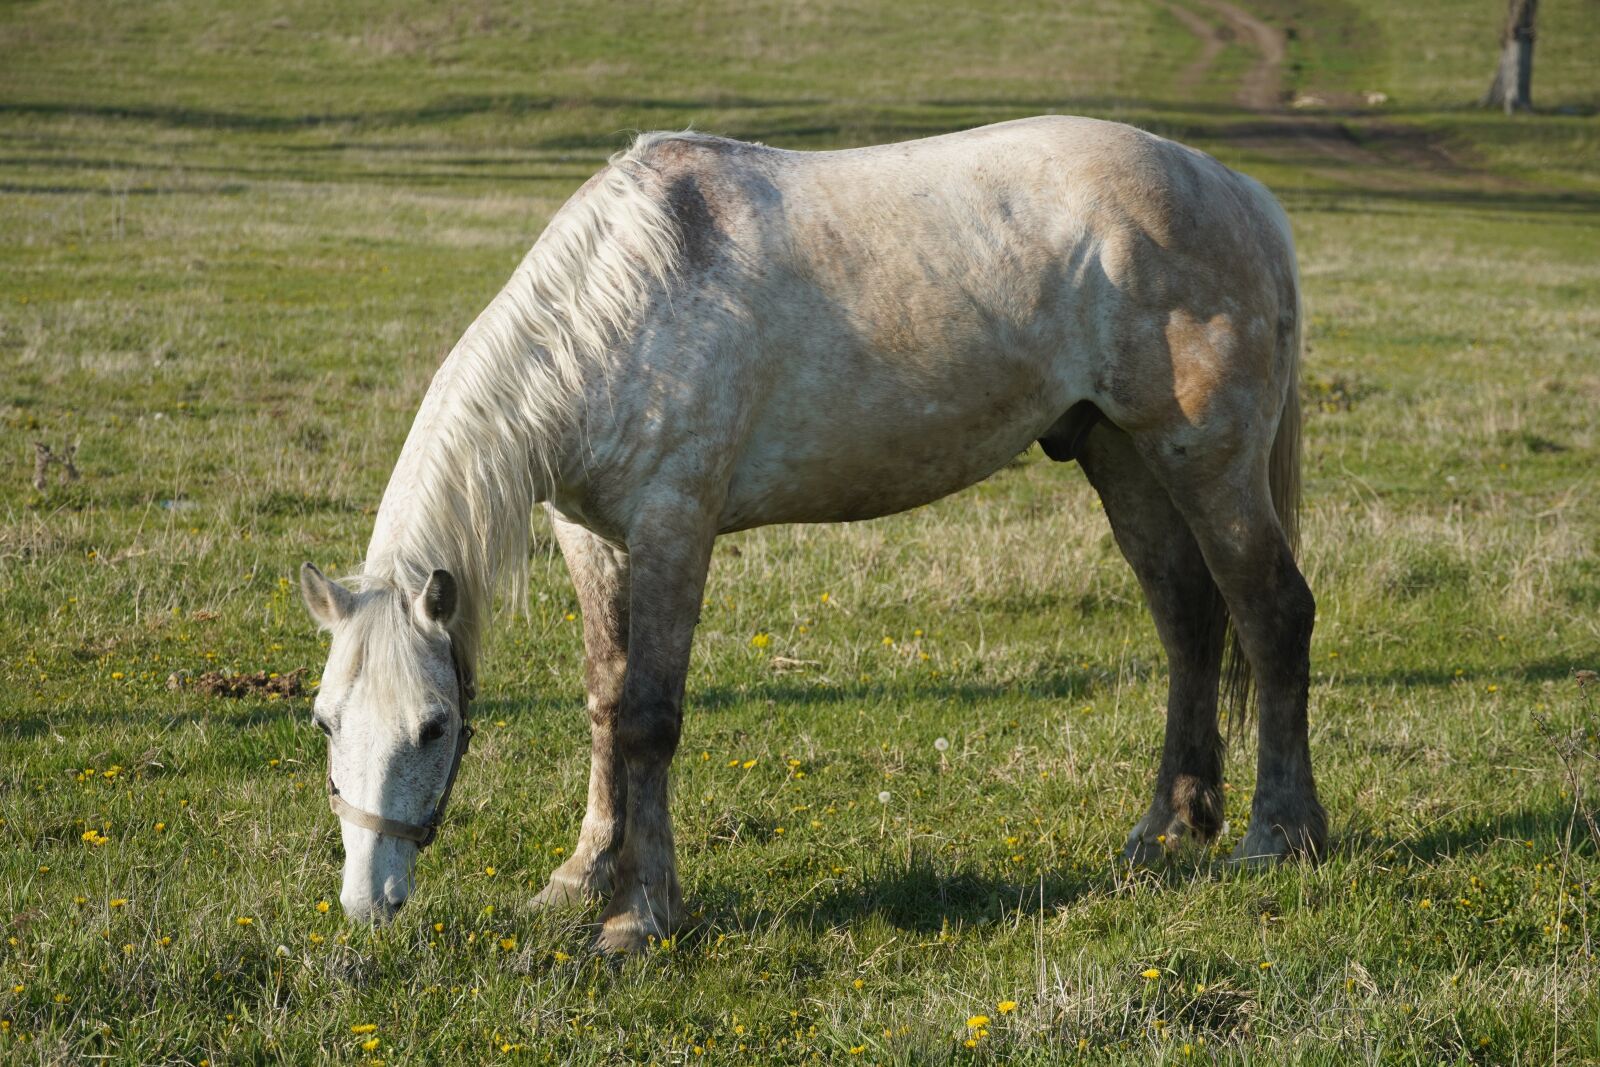 Sony a6400 sample photo. White horse, animal, grass photography